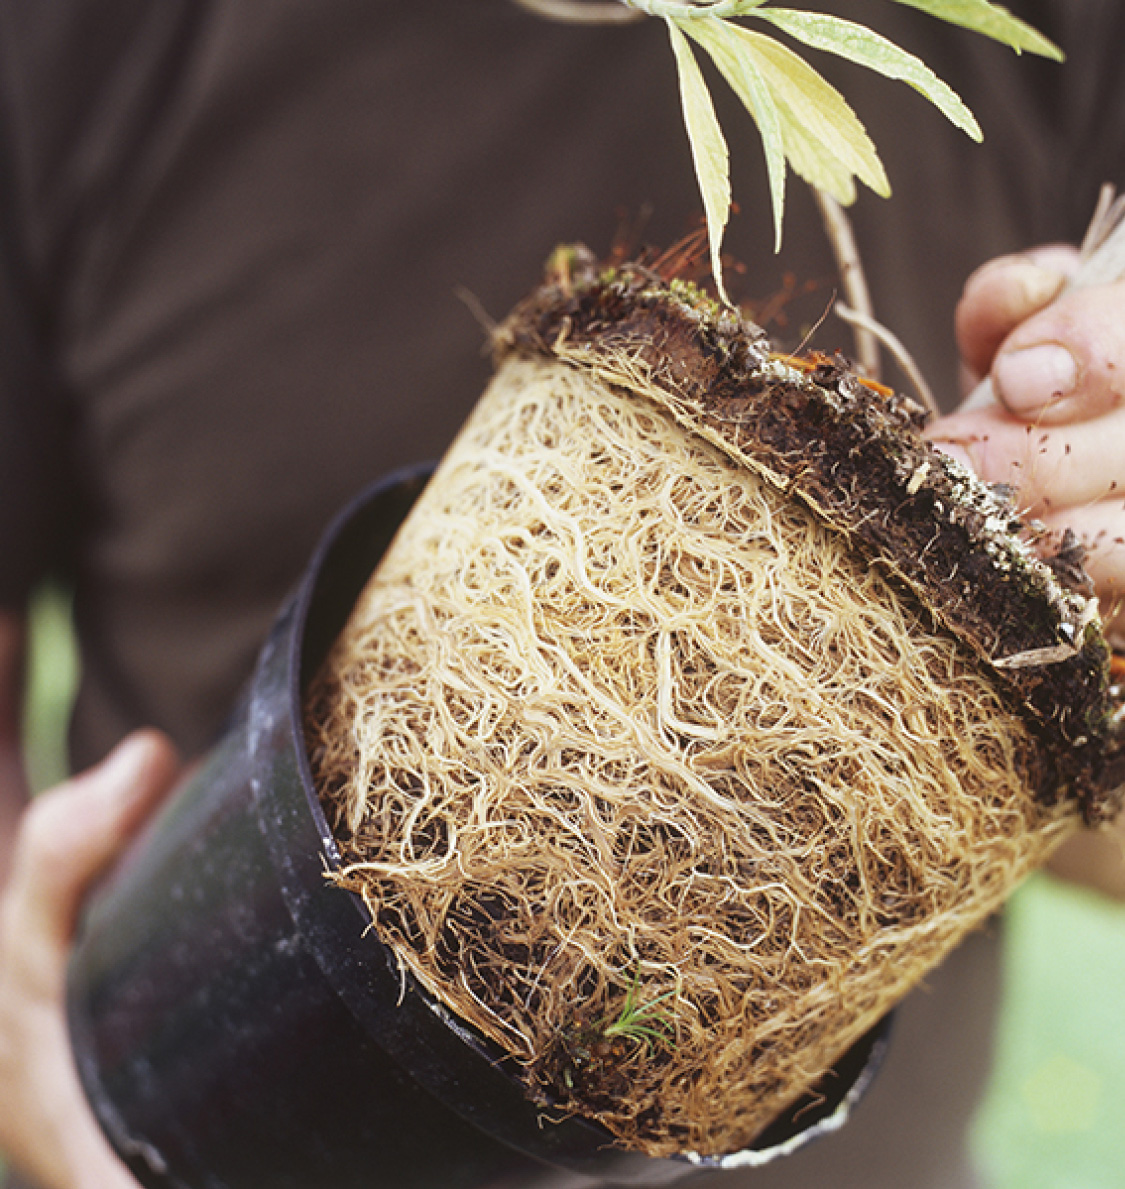 Carefully prise out roots that have coiled tightly around in the pot to help - photo 4